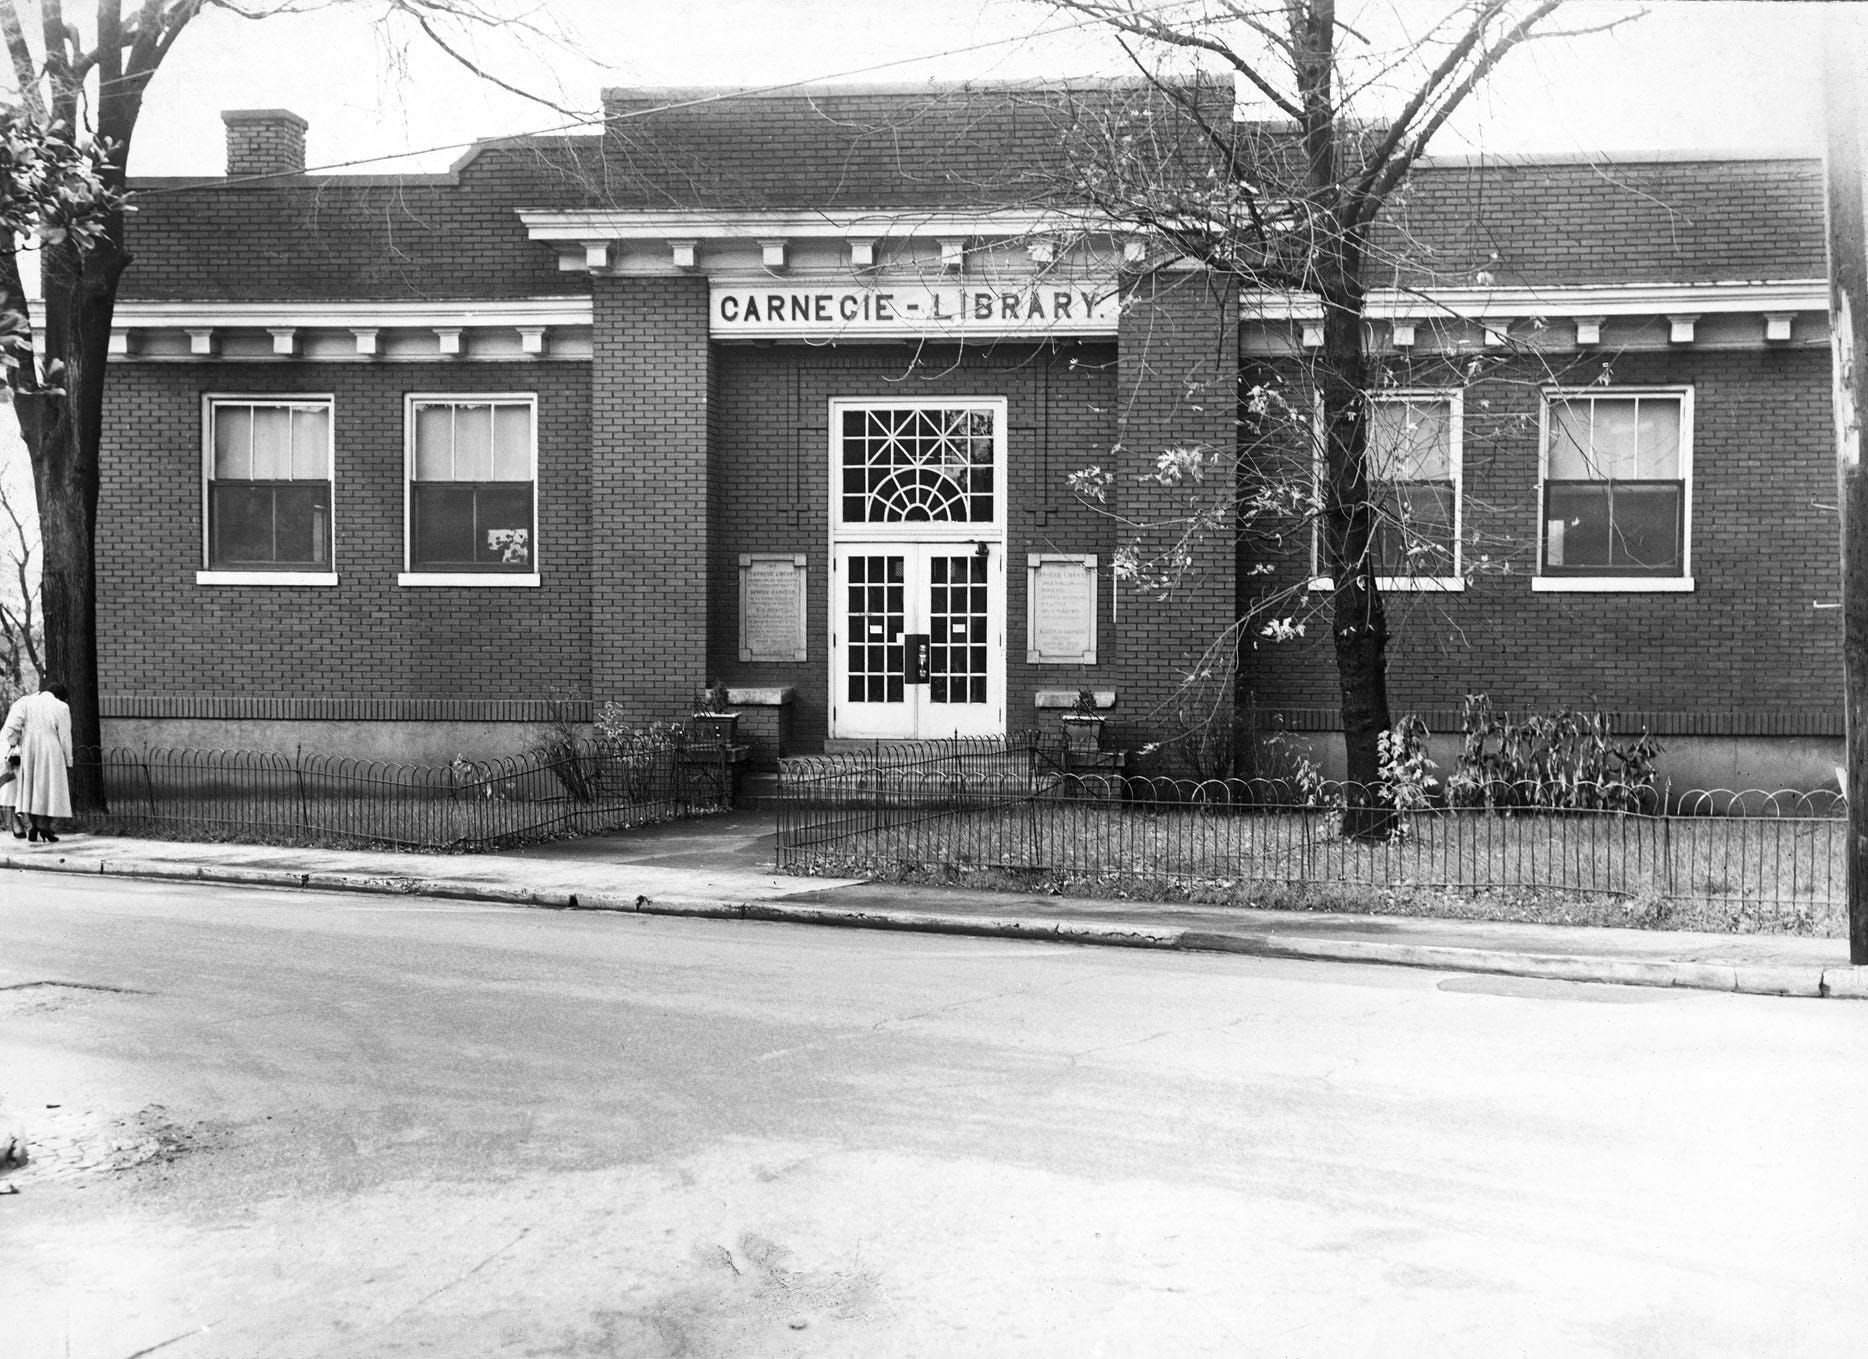 Carnegie Library, circa 1920. One of Knoxville's prominent African-American educators, the brilliant Charles Warner Cansler, proved instrumental in securing funding from Andrew Carnegie's foundation for an African-American public library. This library was completed in 1917 at what was then 405 E. Vine Ave.